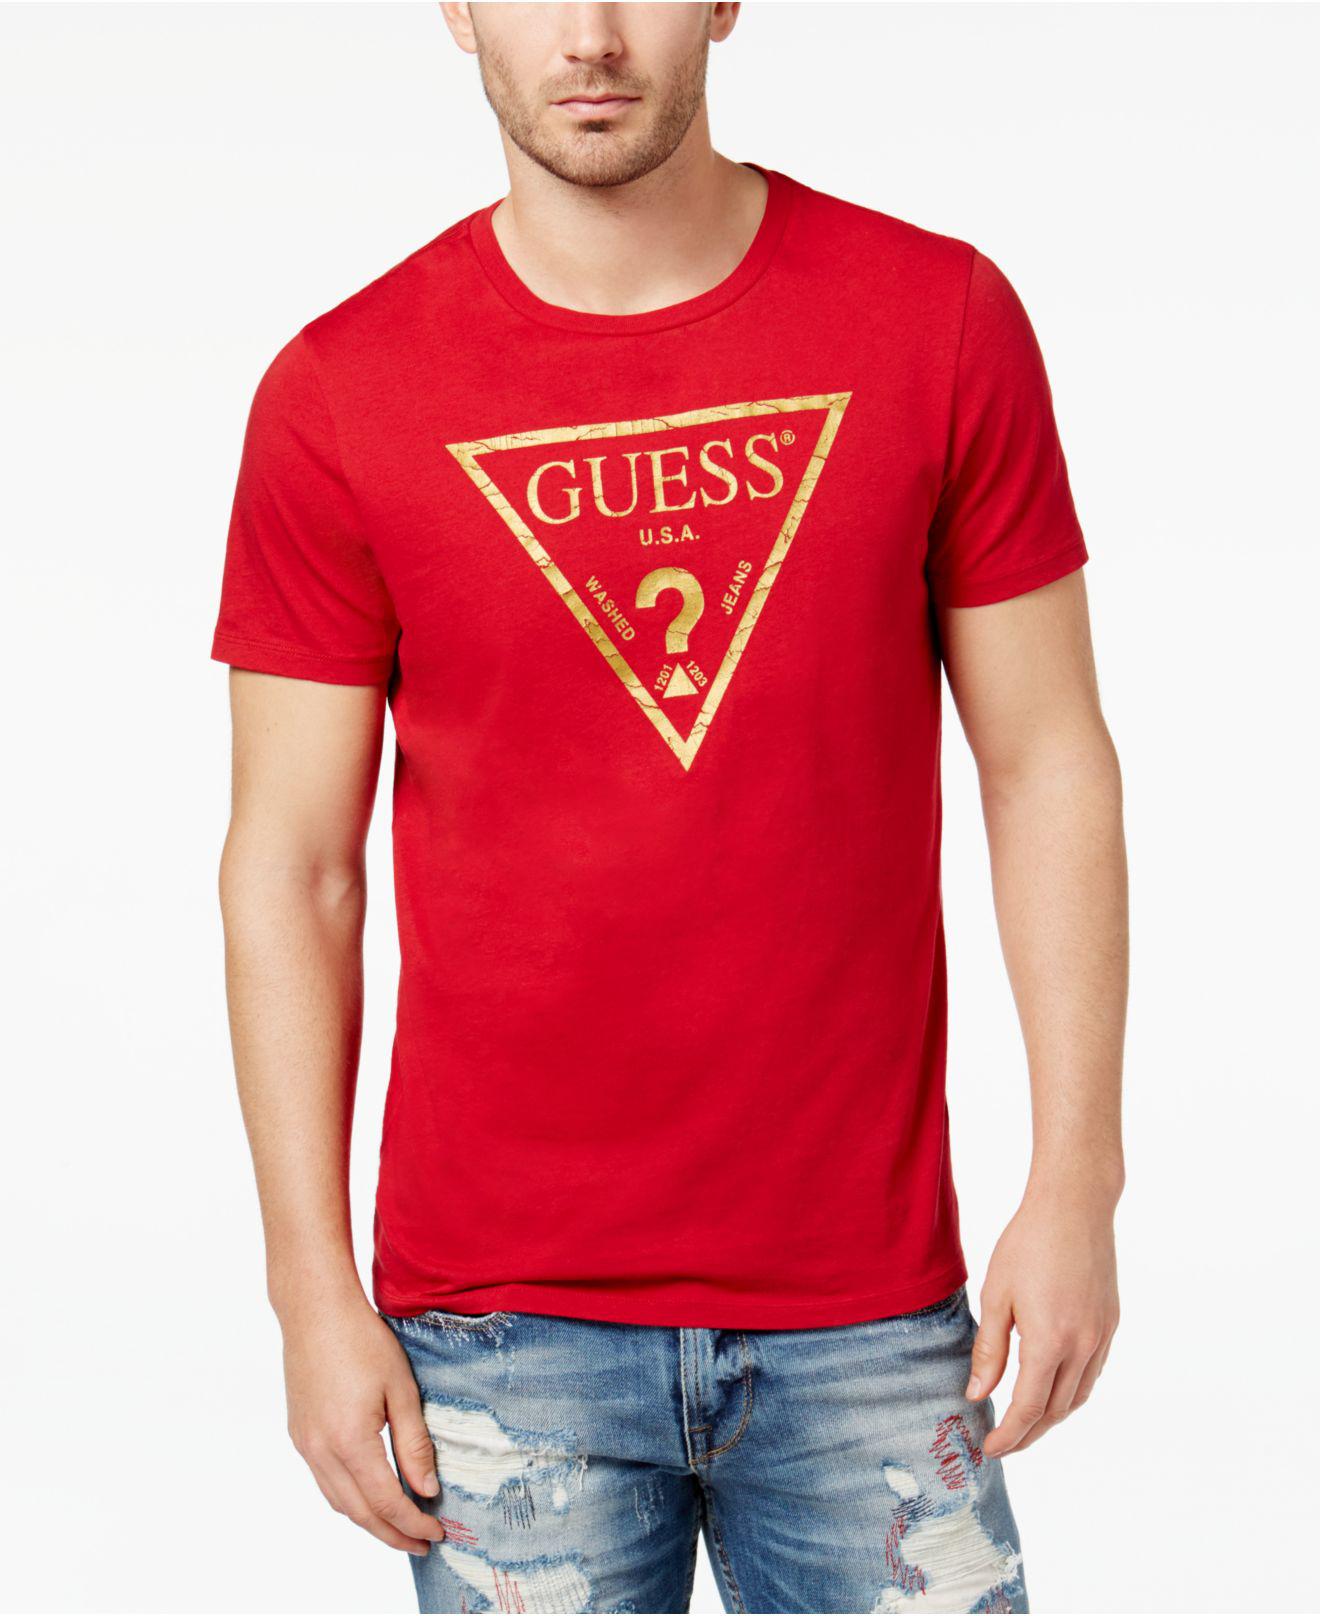 red guess t shirt